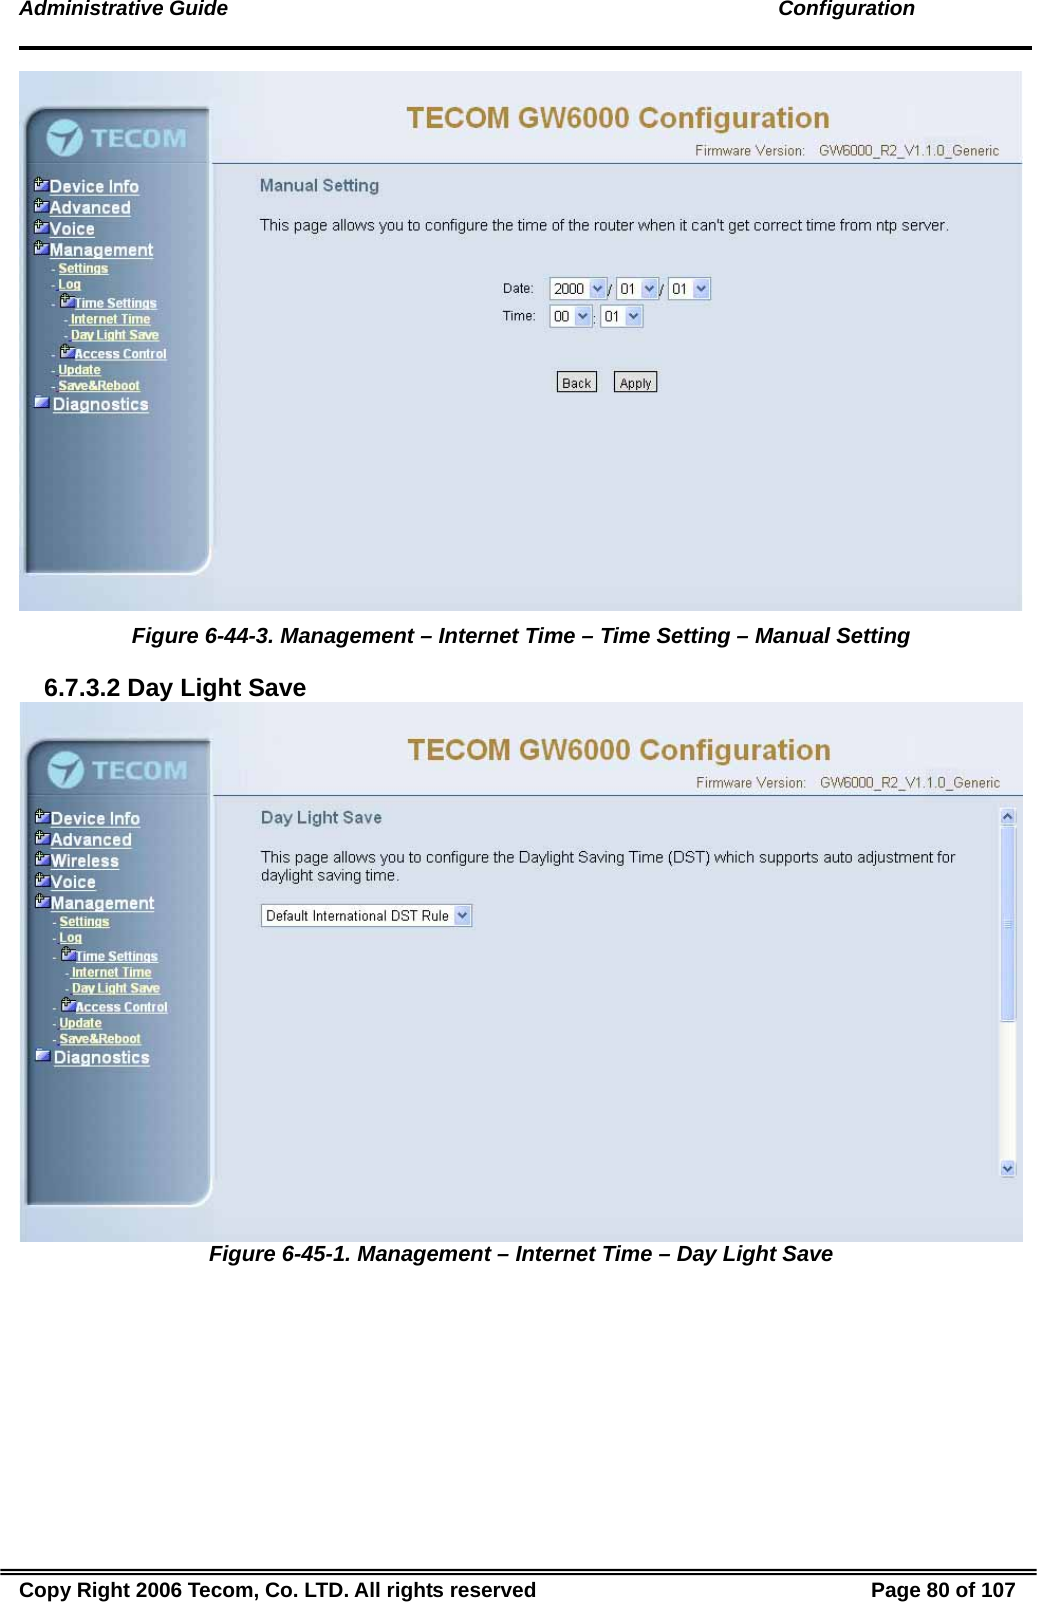 Administrative Guide                                                                                               Configuration  Figure 6-44-3. Management – Internet Time – Time Setting – Manual Setting 6.7.3.2 Day Light Save  Figure 6-45-1. Management – Internet Time – Day Light Save Copy Right 2006 Tecom, Co. LTD. All rights reserved  Page 80 of 107 